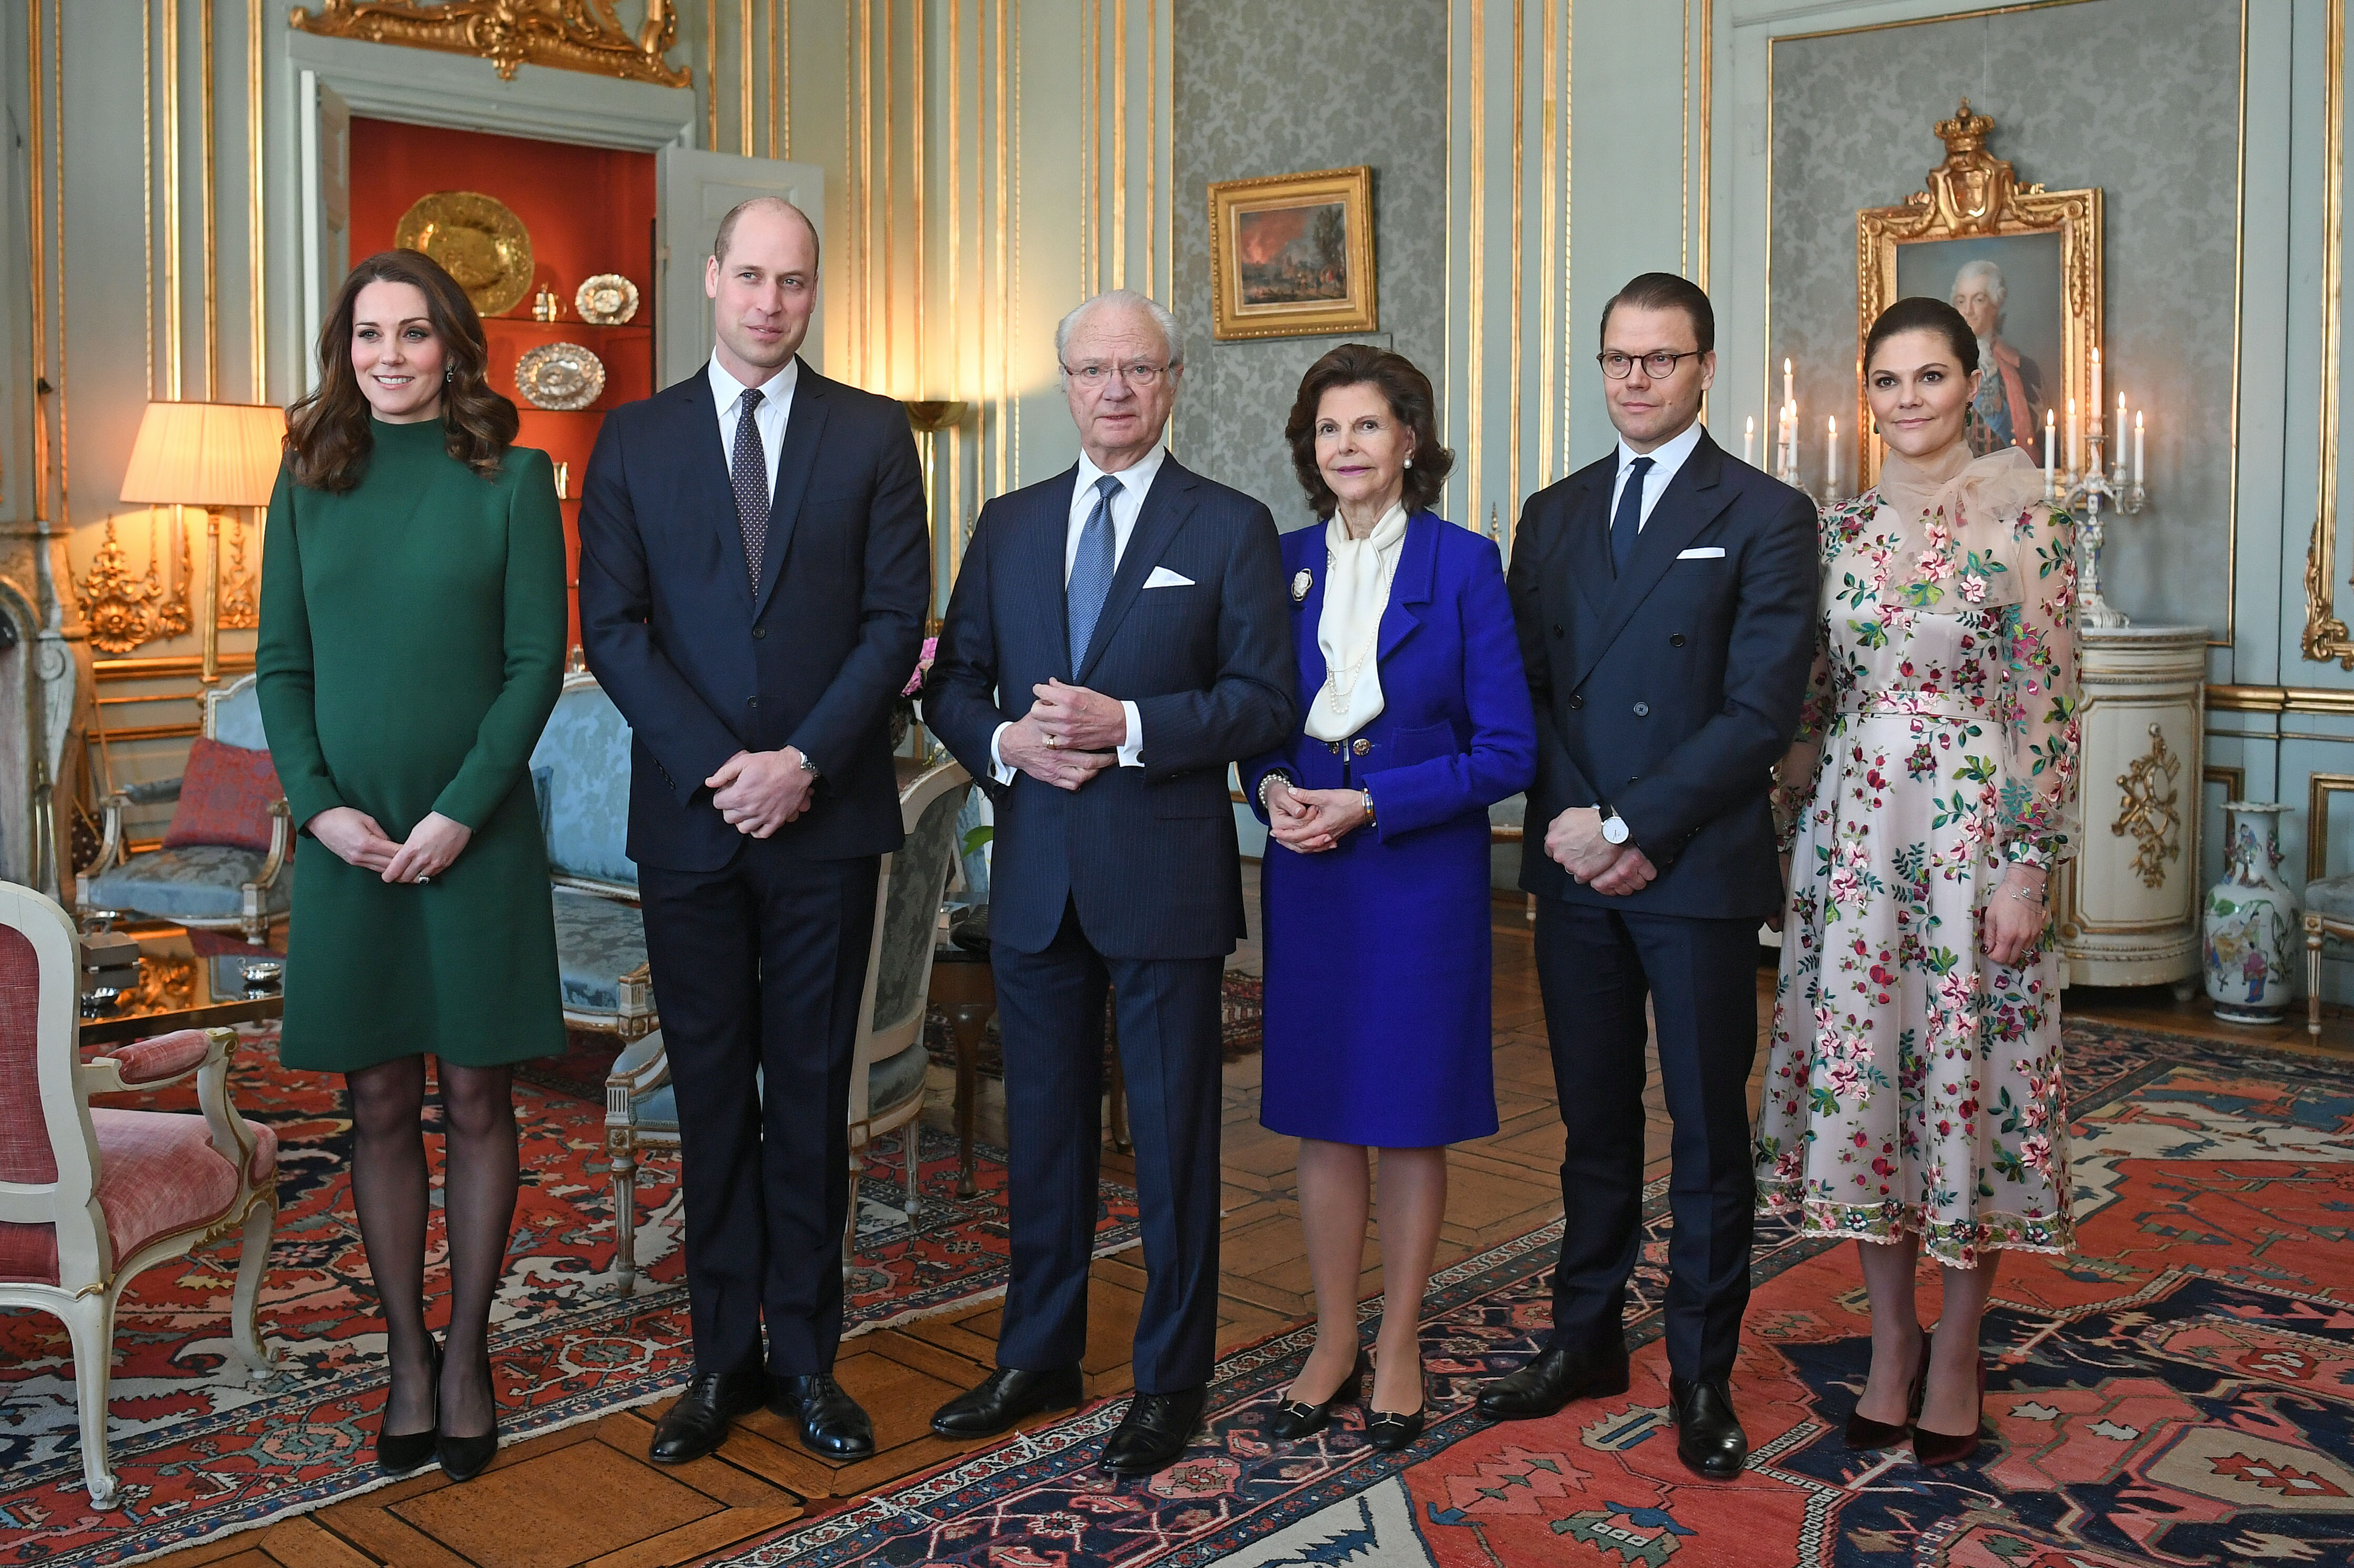 Catherine, Duchess of Cambridge and Prince William, Duke of Cambridge pose with King Carl XVI Gustaf of Sweden, Queen Silvia of Sweden, Prince Daniel, Duke of Vastergotland and Crown Princess Victoria of Sweden ahead of a lunch at the Royal Palace of Stockholm during day one of their Royal visit to Sweden on January 30, 2018 in Stockholm, Sweden. (Pool—Getty Images)